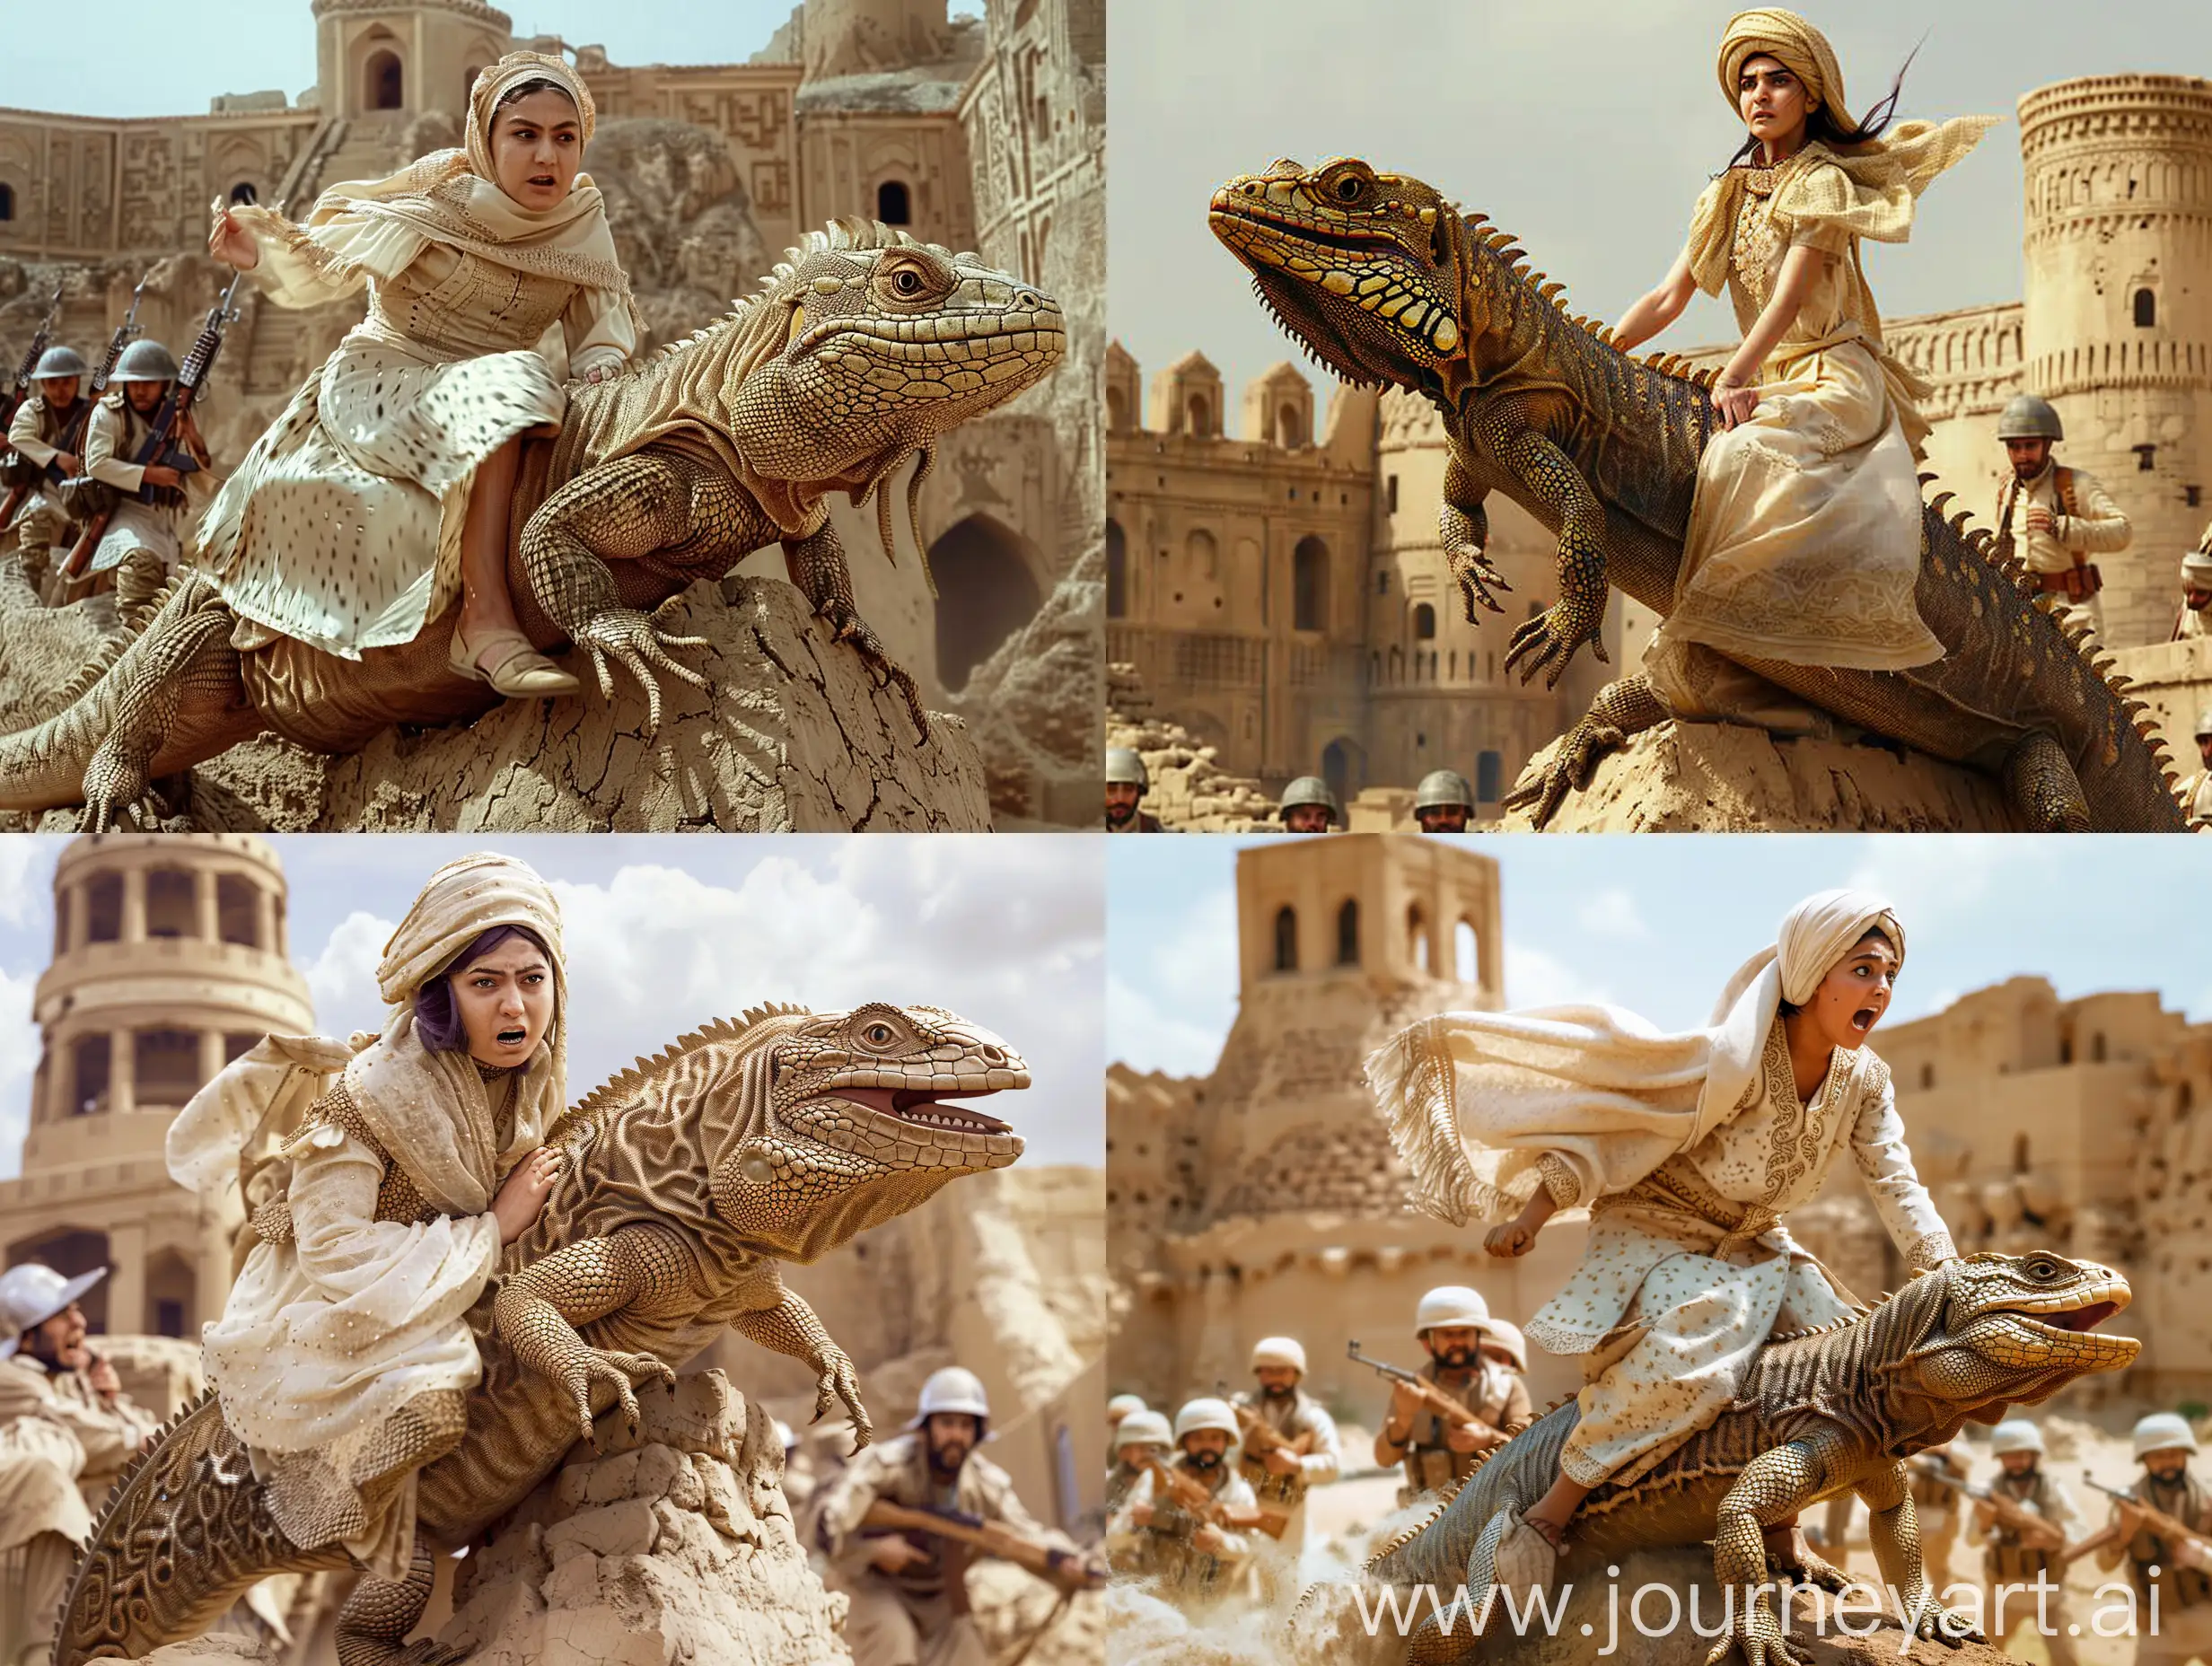 A young Persian woman wearing a traditional cream dress and a cream shawl on her head while riding a giant fat lizard angrily climbs the mud and clay fortress of Arg Bam in the Persian Empire in Iran, Persian soldiers I am attacking him in traditional clothes and he is climbing the tower of Arg Bam, create a very realistic HD quality photo with fine details and 4K and create the afternoon lighting.